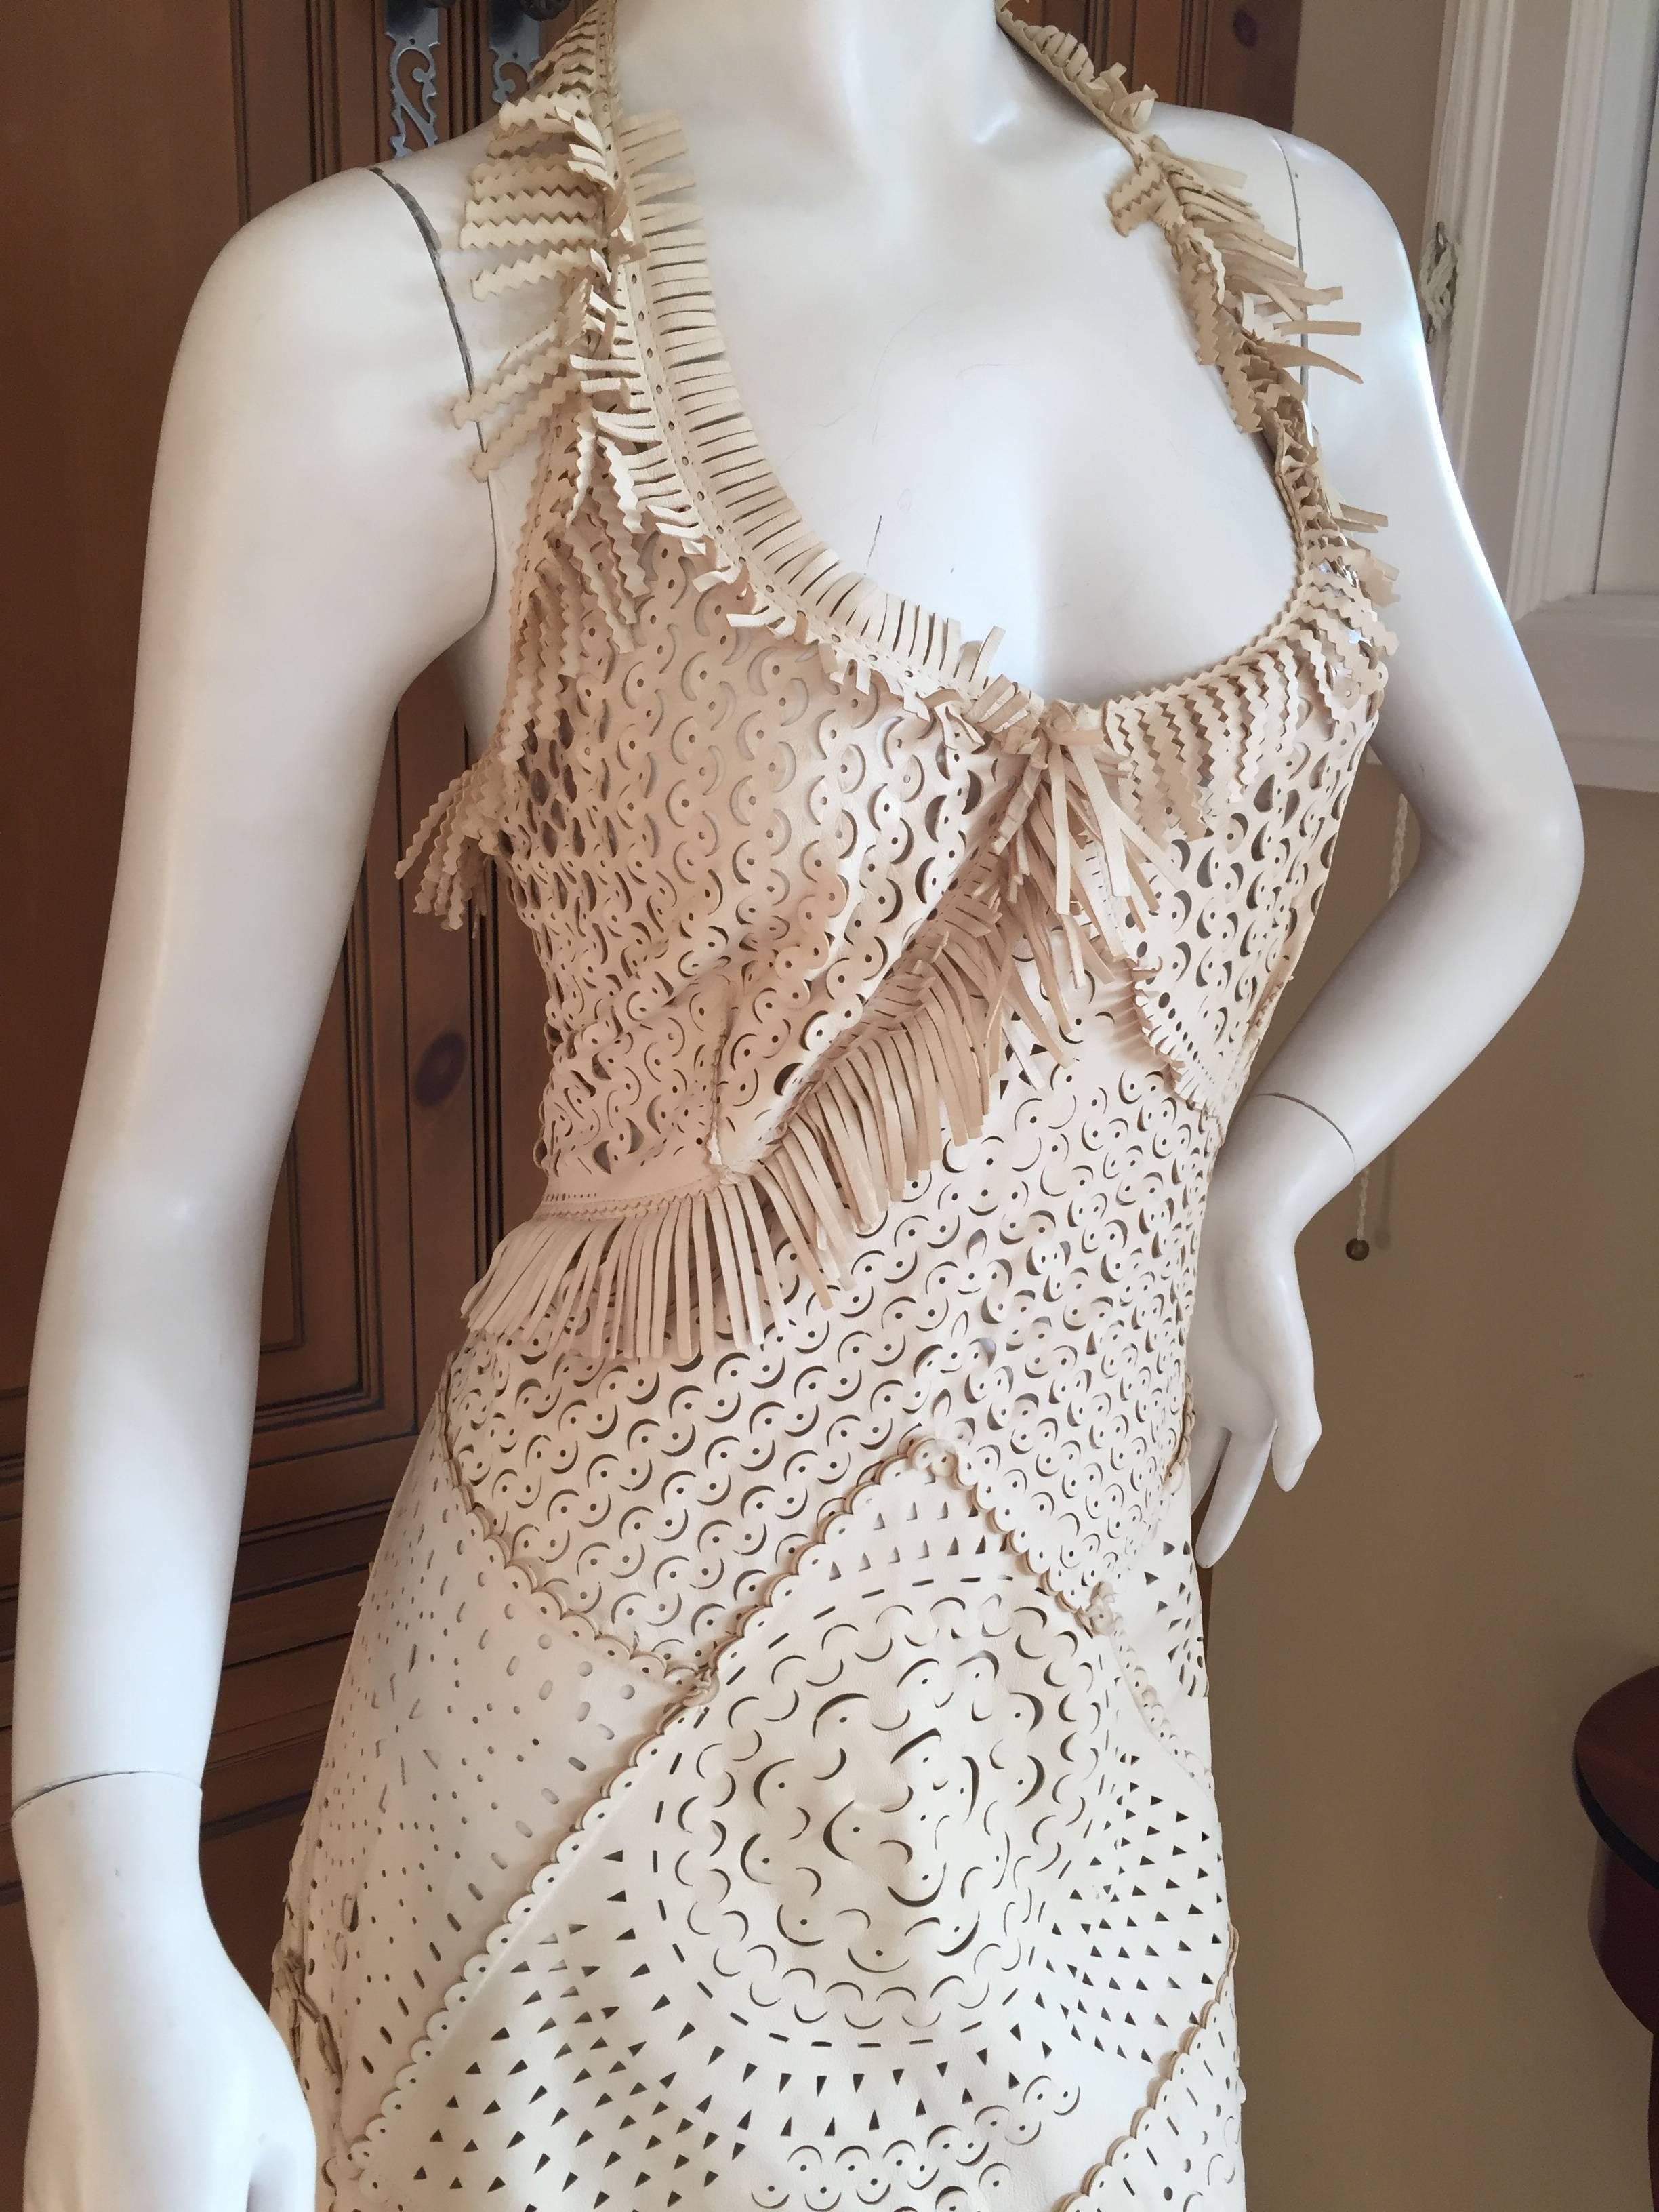 Jean Paul Gaultier Lazer Cut Leather Dress In Excellent Condition For Sale In Cloverdale, CA